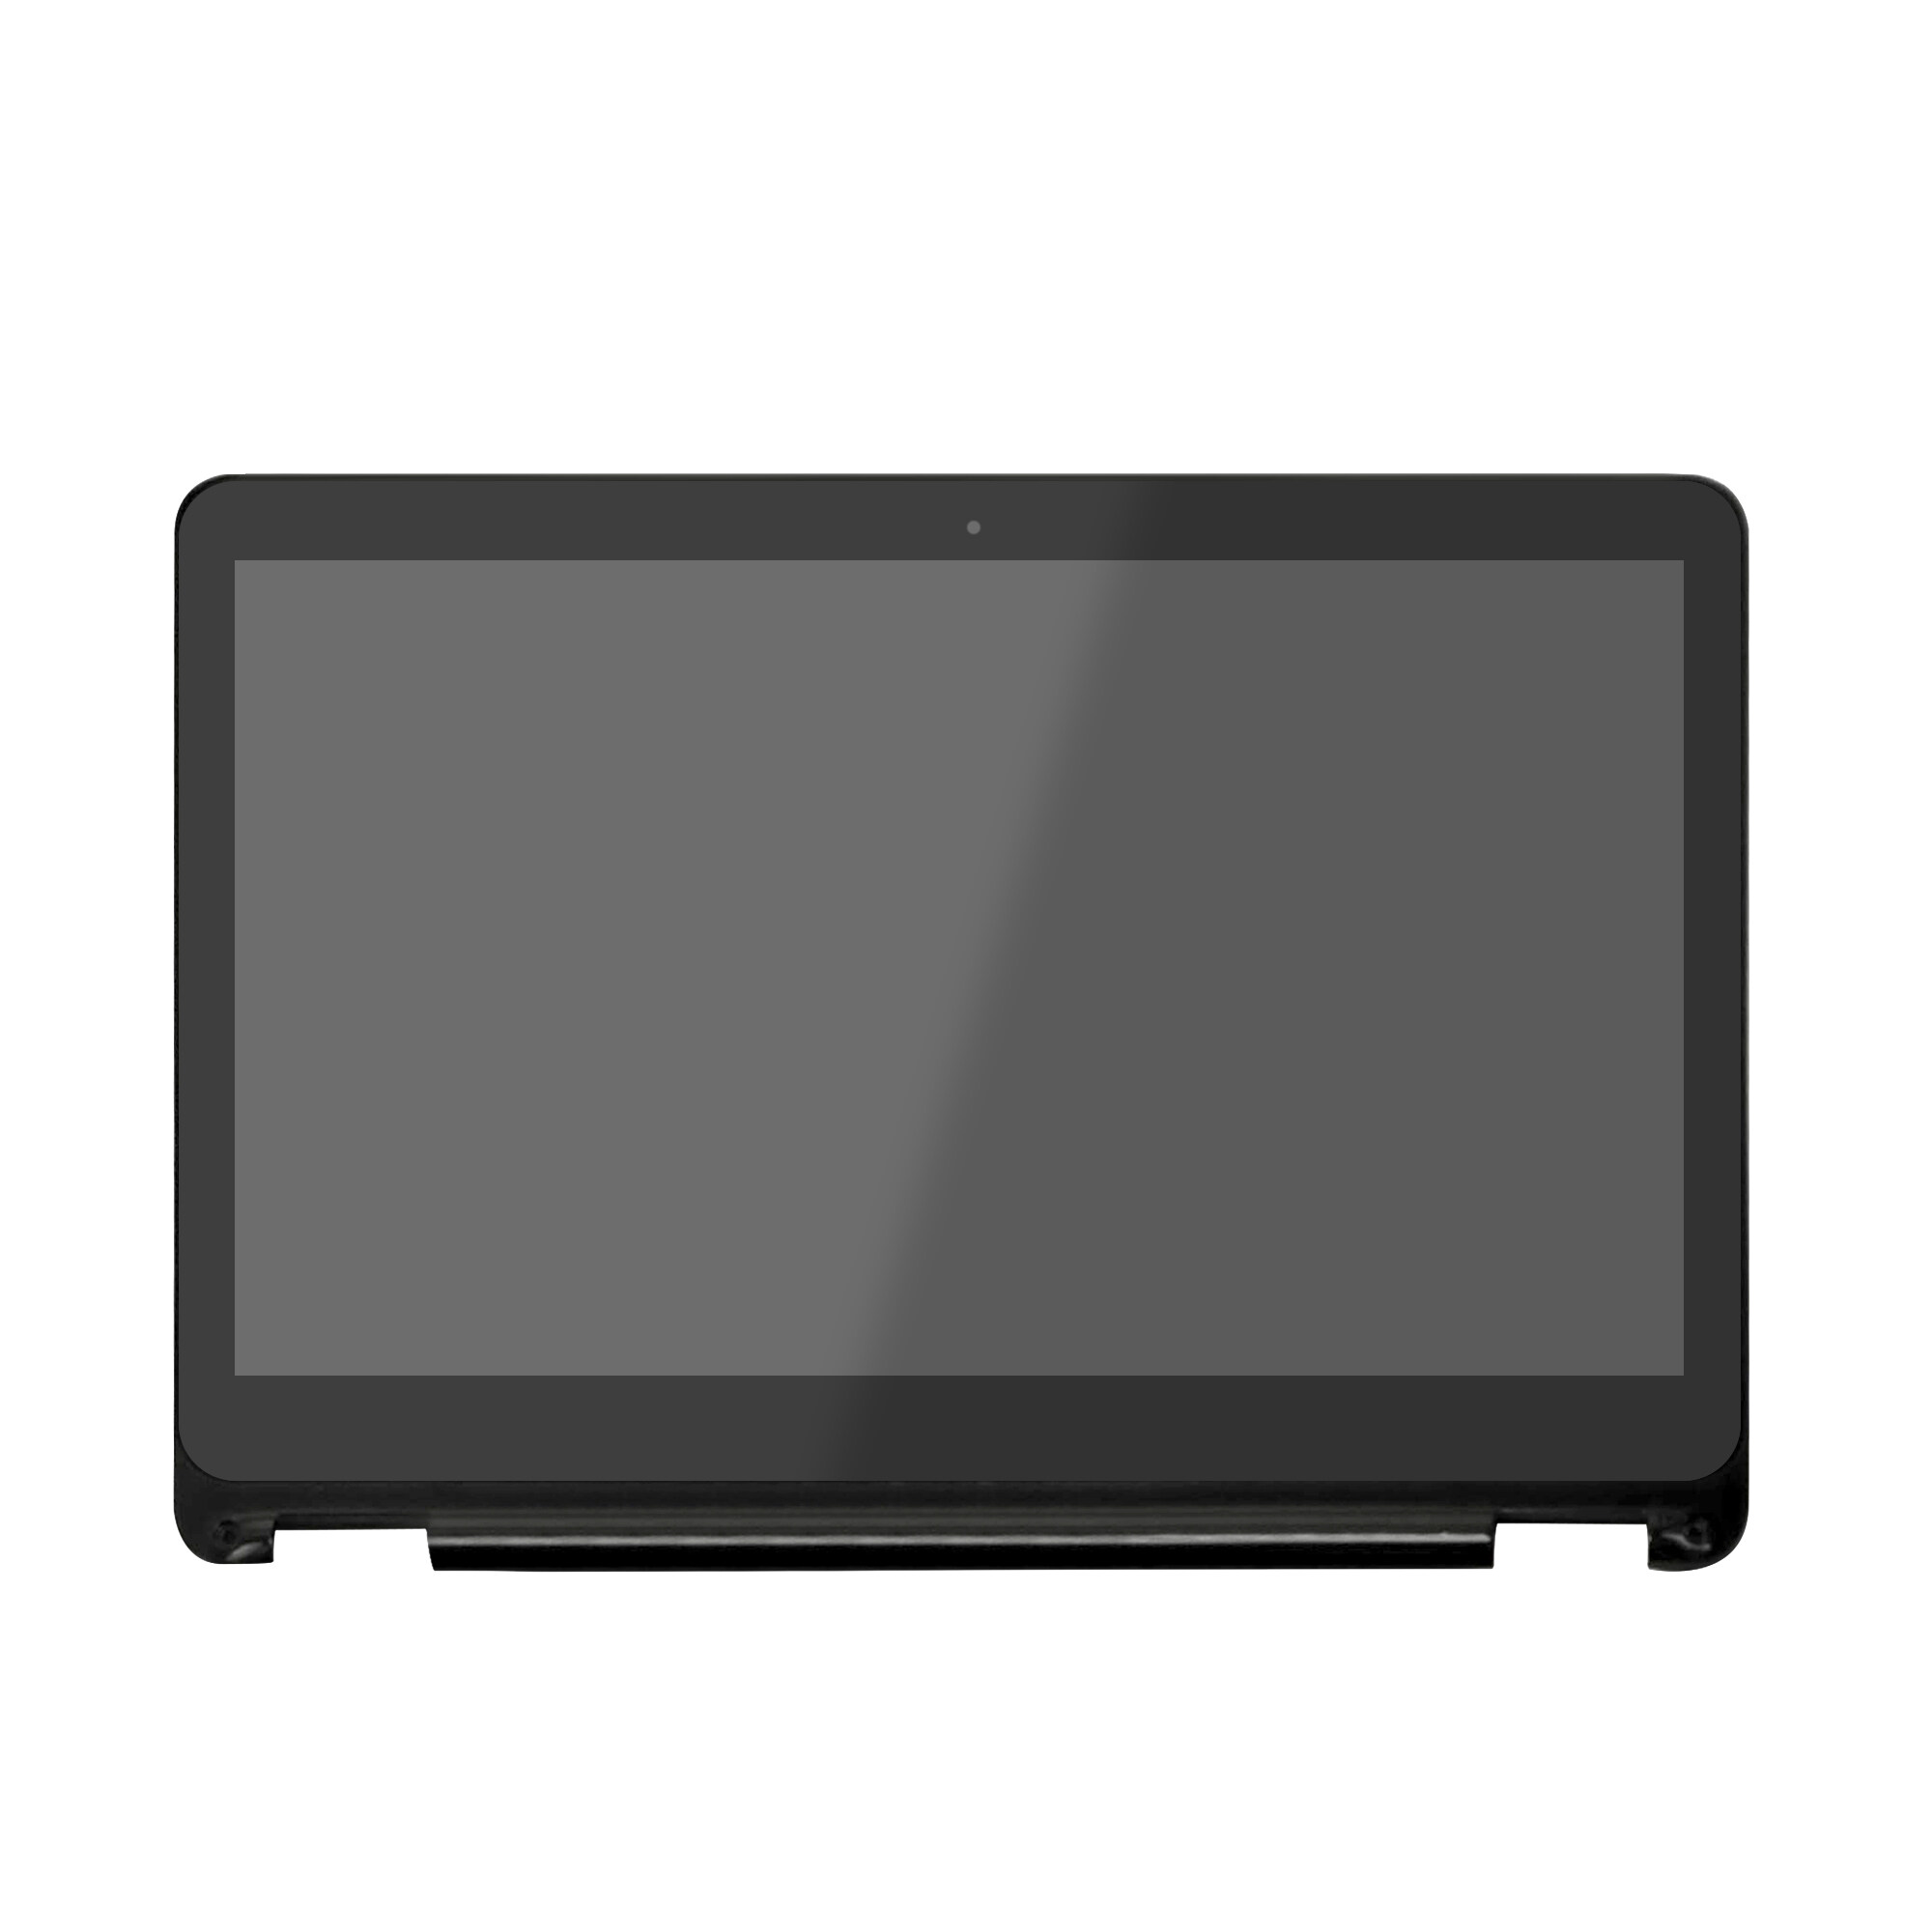 13.3 inch Laptop LCD Screen Touch Digitizer Assembly with Bezel for Asus Transformer Book Flip Q303 Q303UA Q303UJ